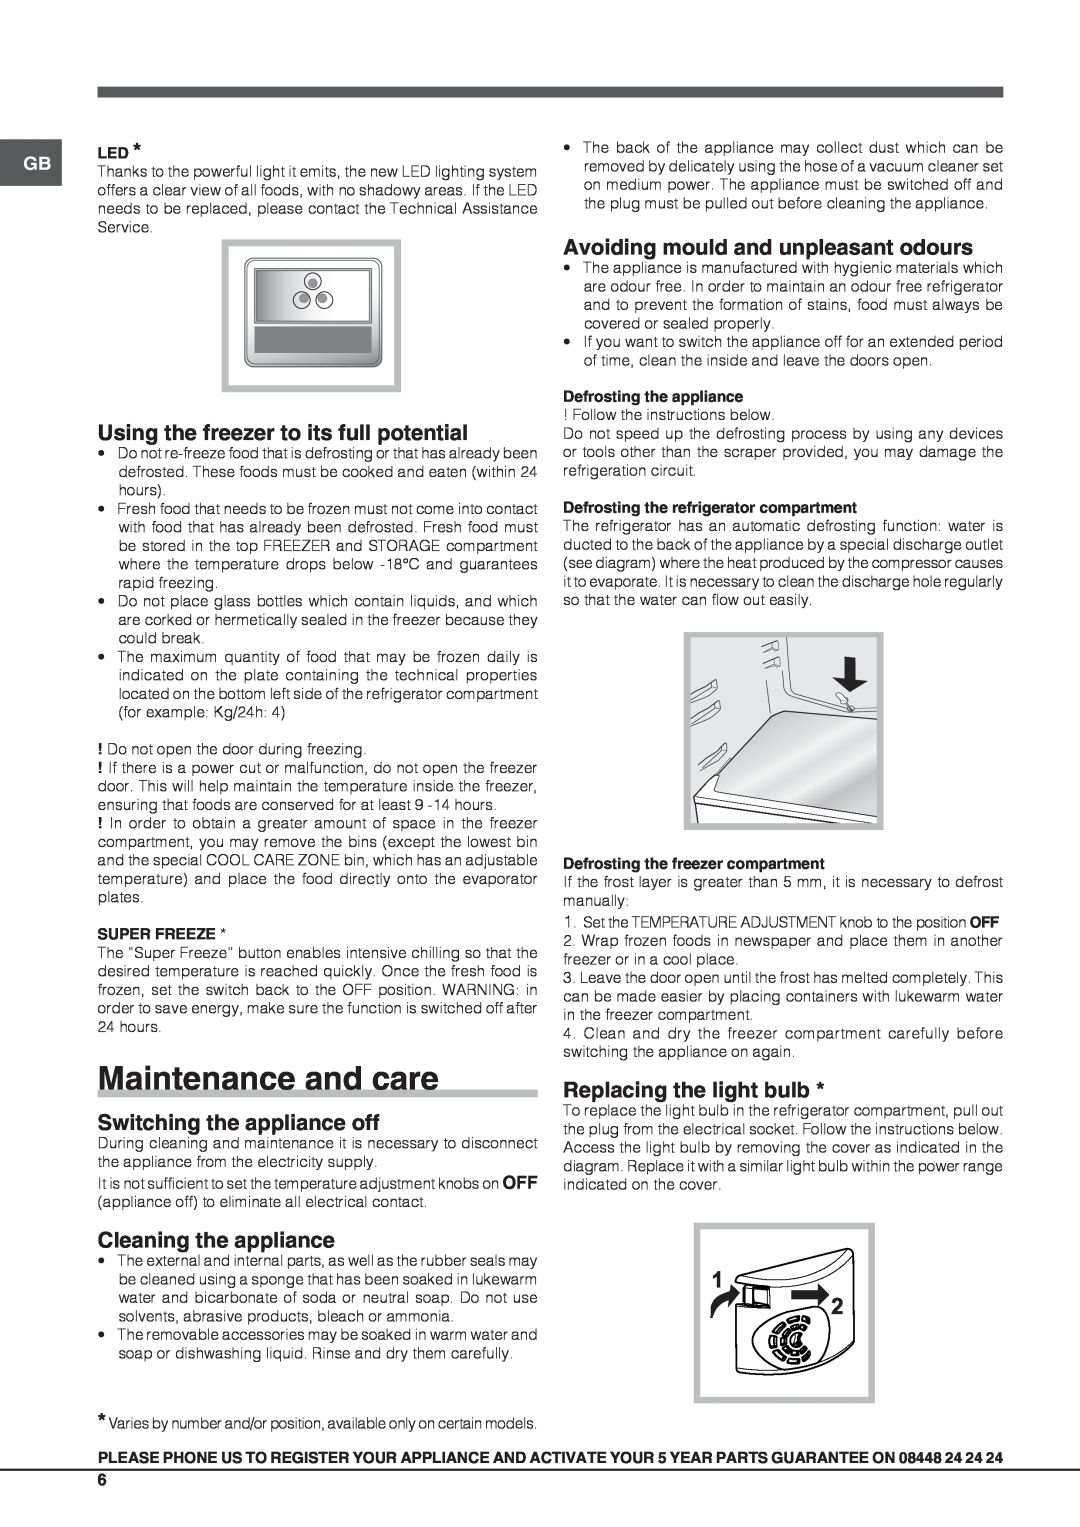 Hotpoint HM 3x AA AI manual Maintenance and care, Using the freezer to its full potential, Switching the appliance off 